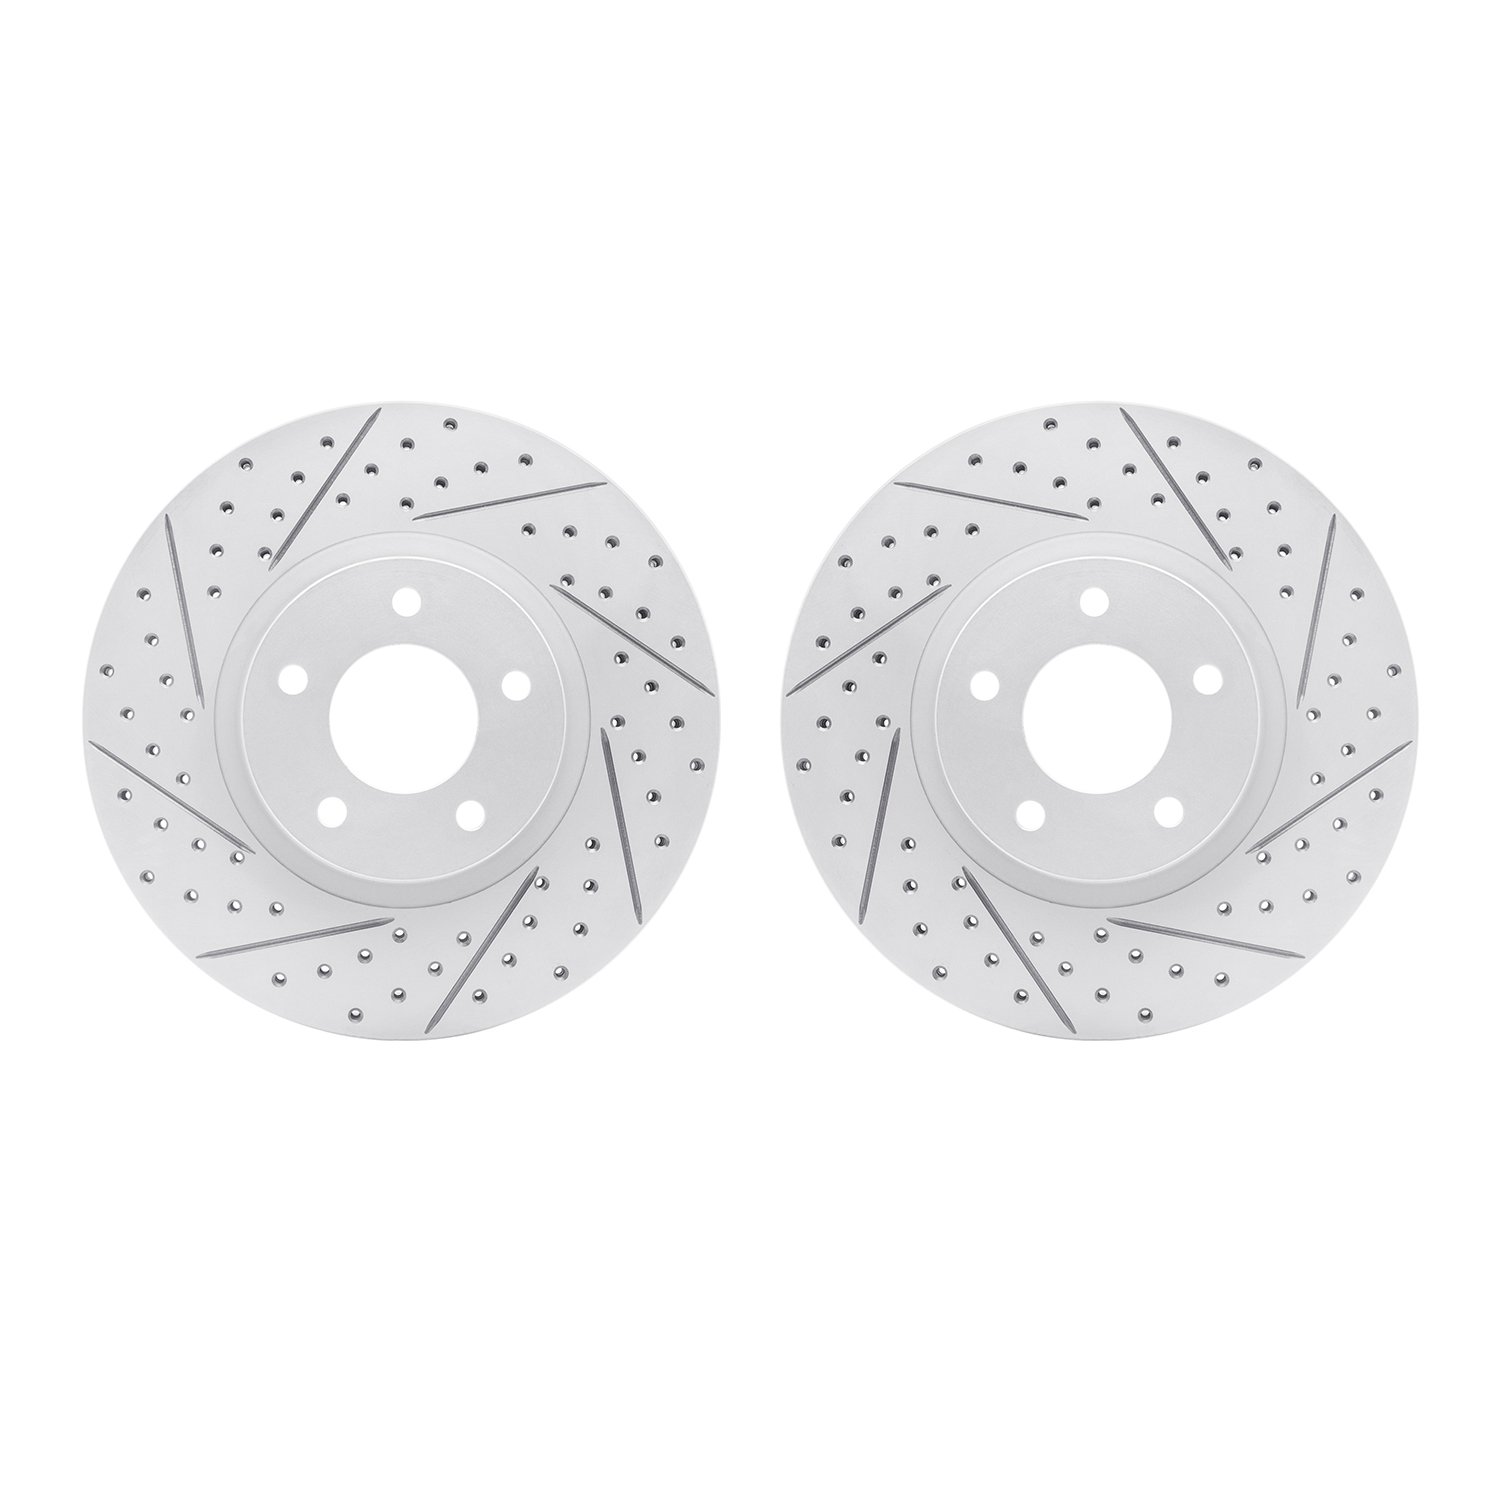 2002-80006 Geoperformance Drilled/Slotted Brake Rotors, 2007-2013 Ford/Lincoln/Mercury/Mazda, Position: Front